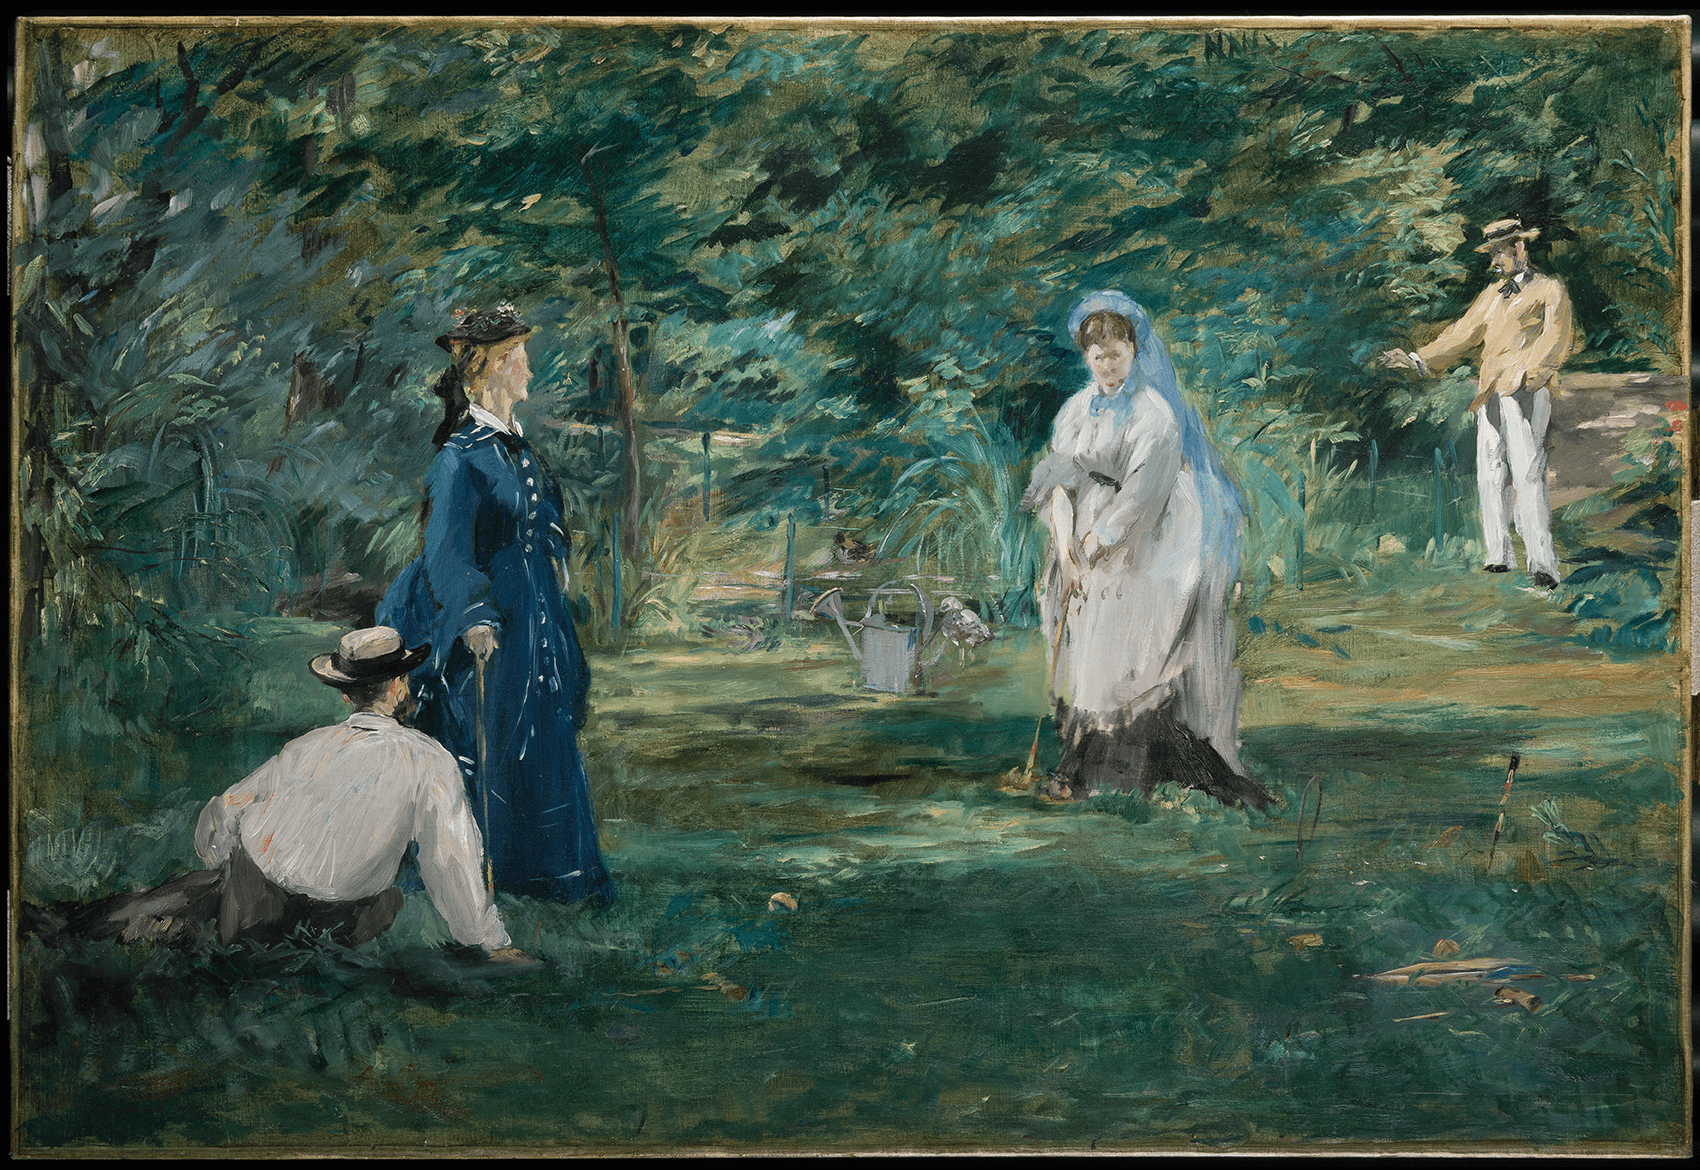 A painting depicting a group of people standing in the forest. To the left there is a woman standing with a blue dress, while a man sits on the ground next to her wearing a white shirt and hat. To their right, a woman wearing a white dress stands in front of a man wearing a yellow shirt with white pants.